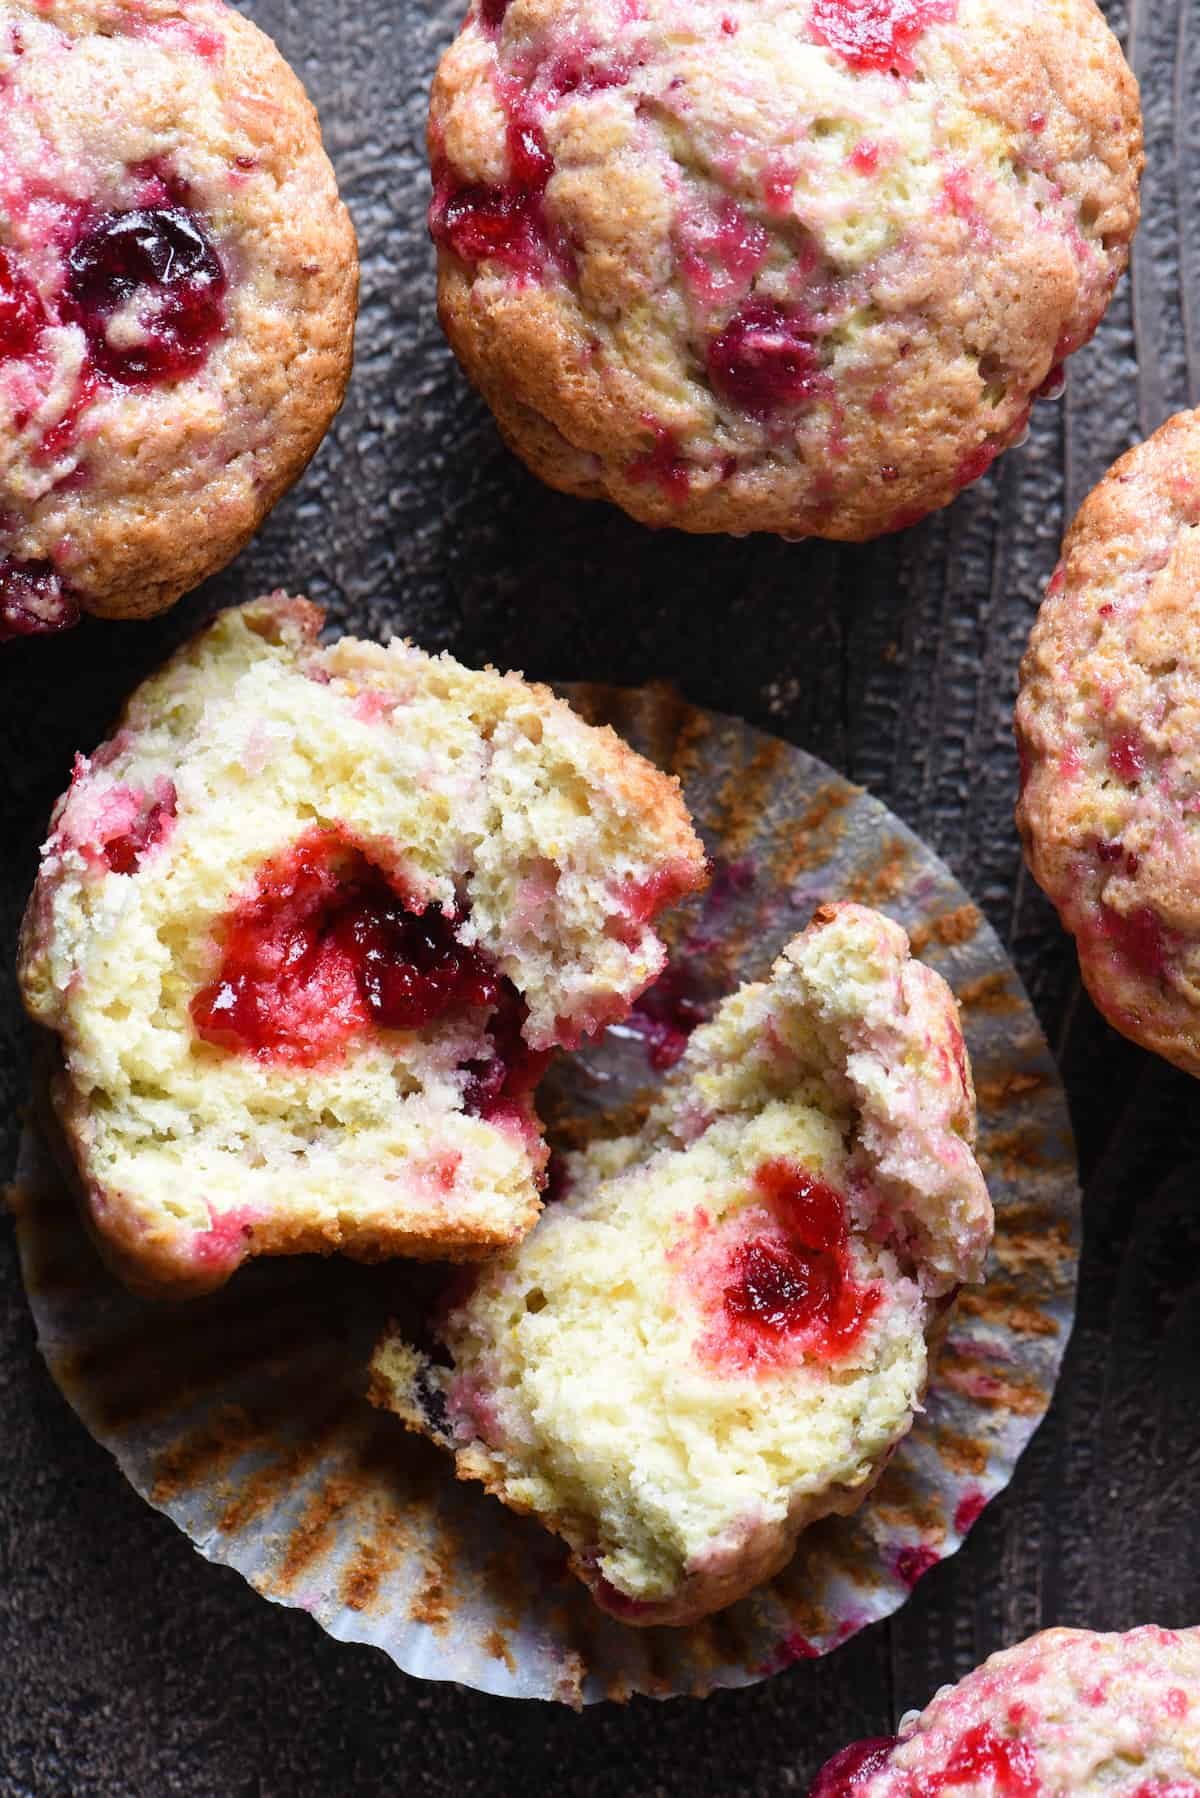 Overhead photo of cranberry muffins, with one broken in half to reveal inside.